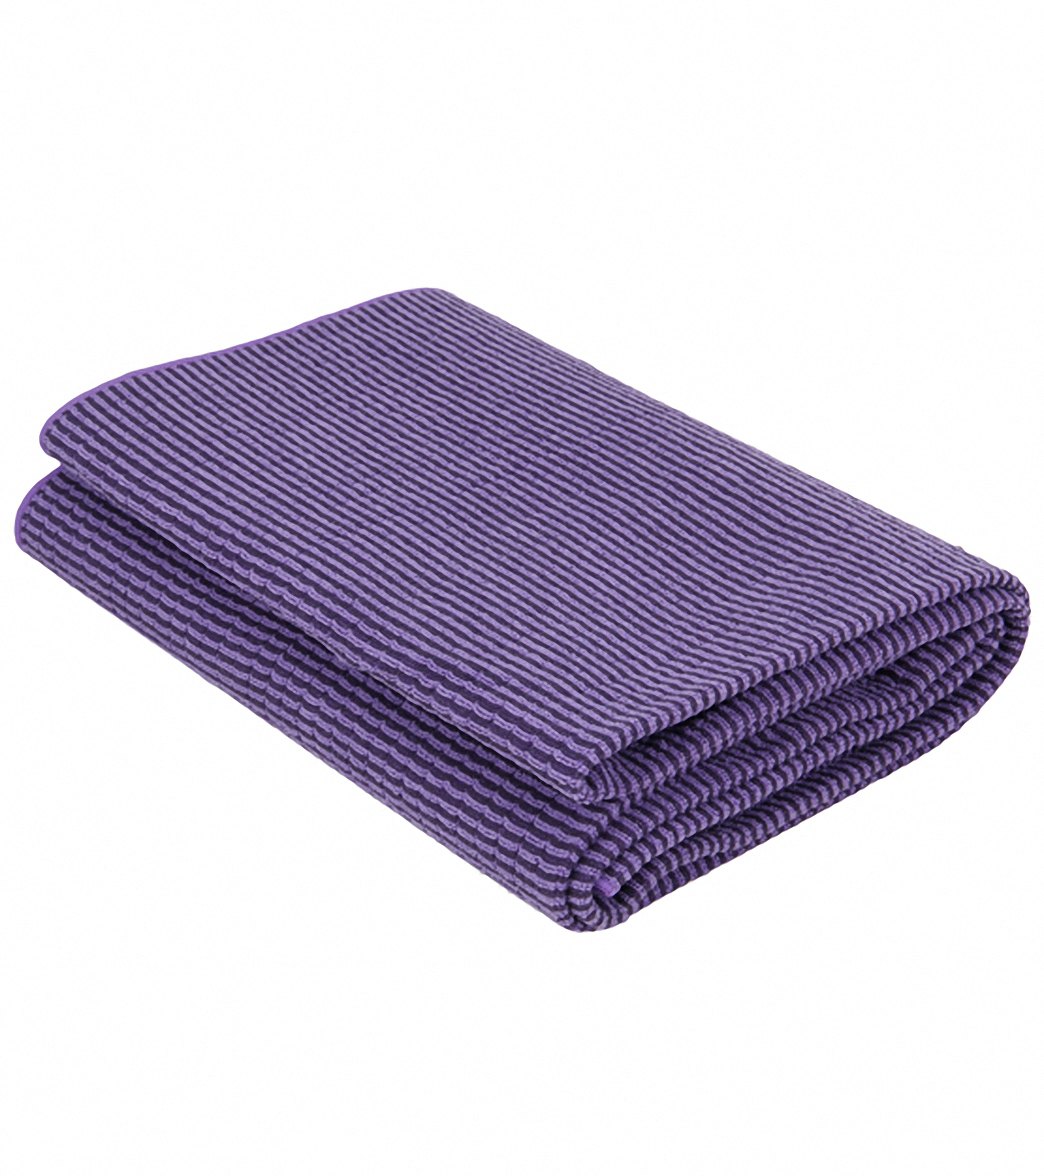 Blue Non-Slip Microfiber Hot Yoga Towel with Carry Bag - Hobby Monsters